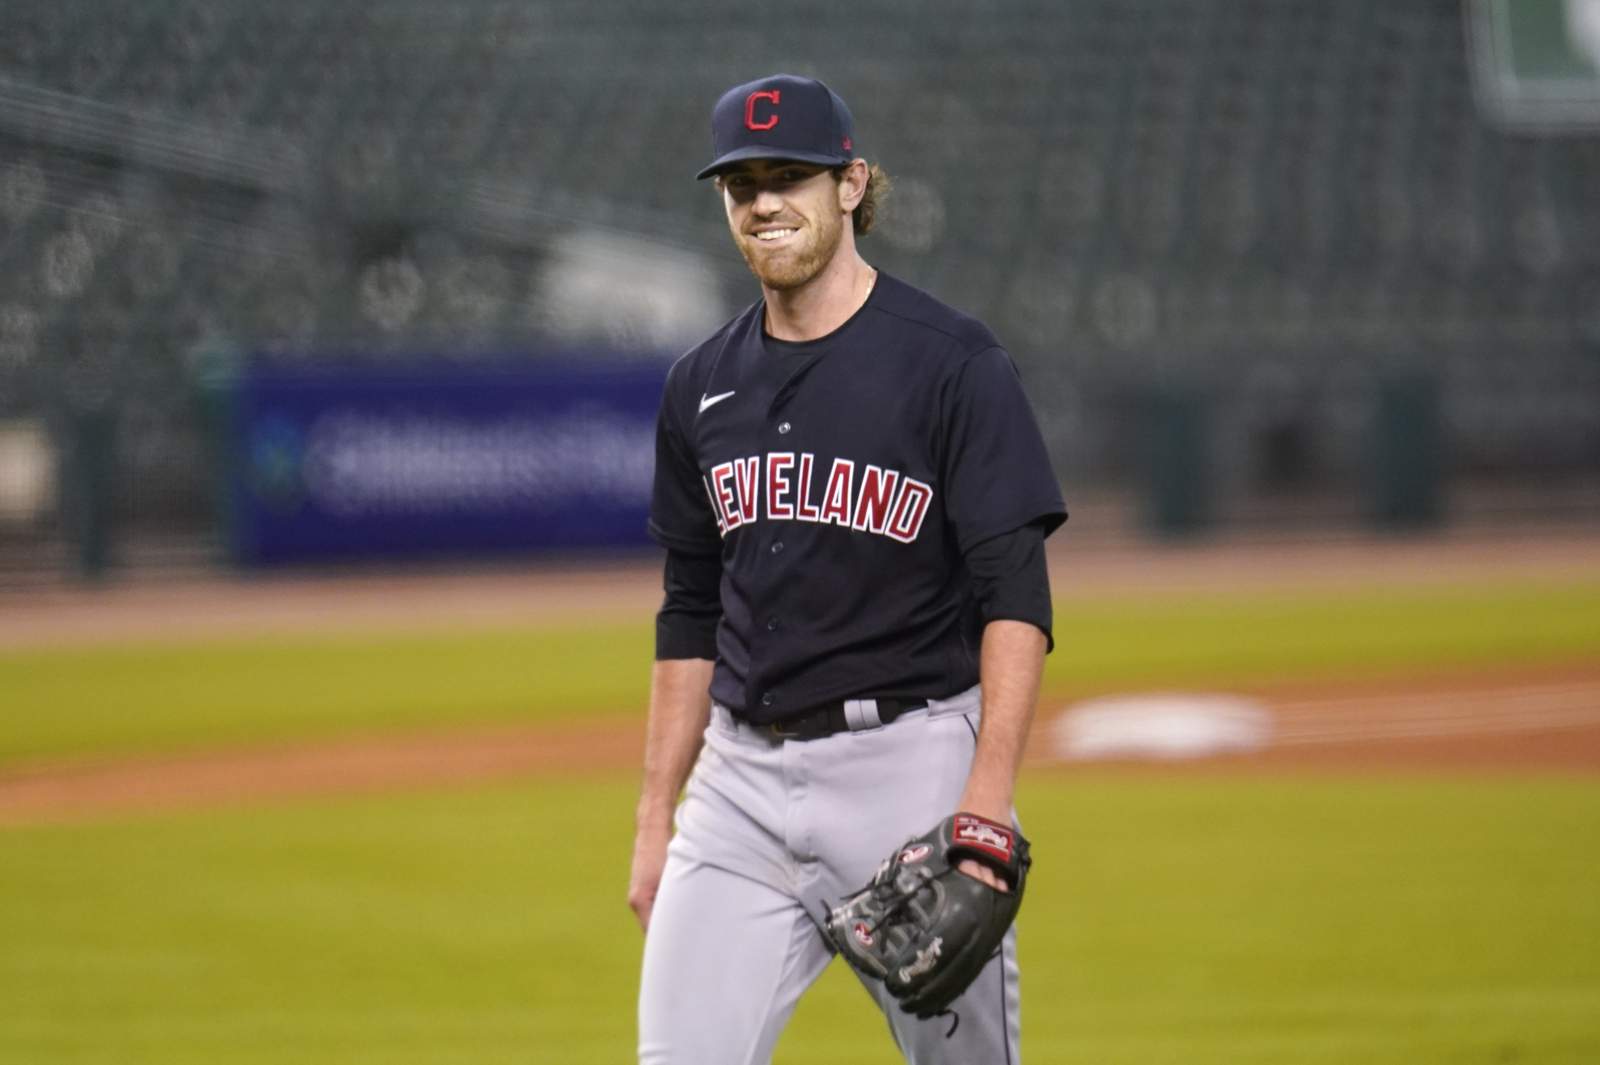 LEADING OFF: Indians' Bieber, Yankees' Cole take the mound